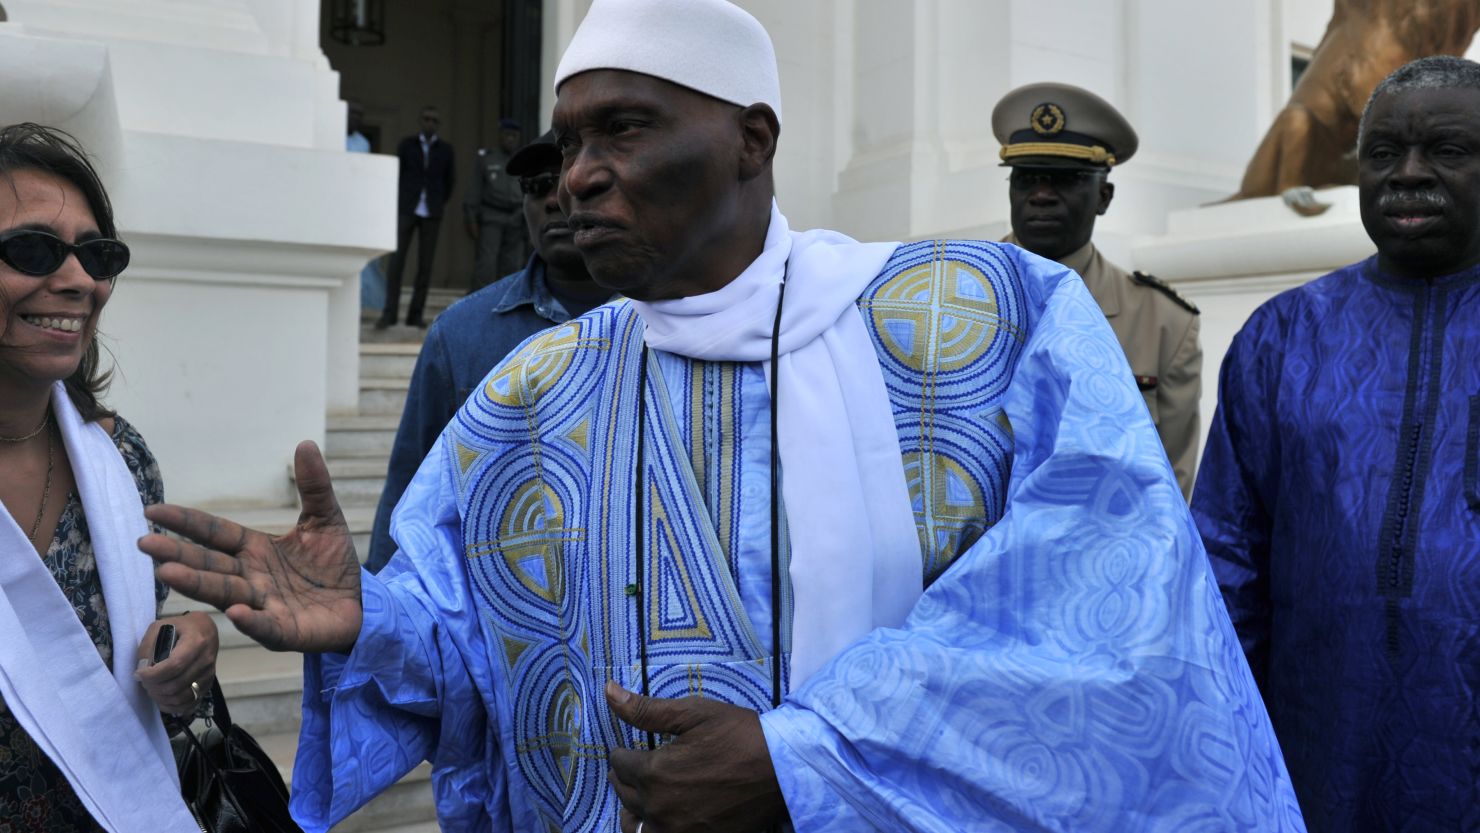 Senegalese president and presidential candidate Abdoulaye Wade on March 23, in Dakar.